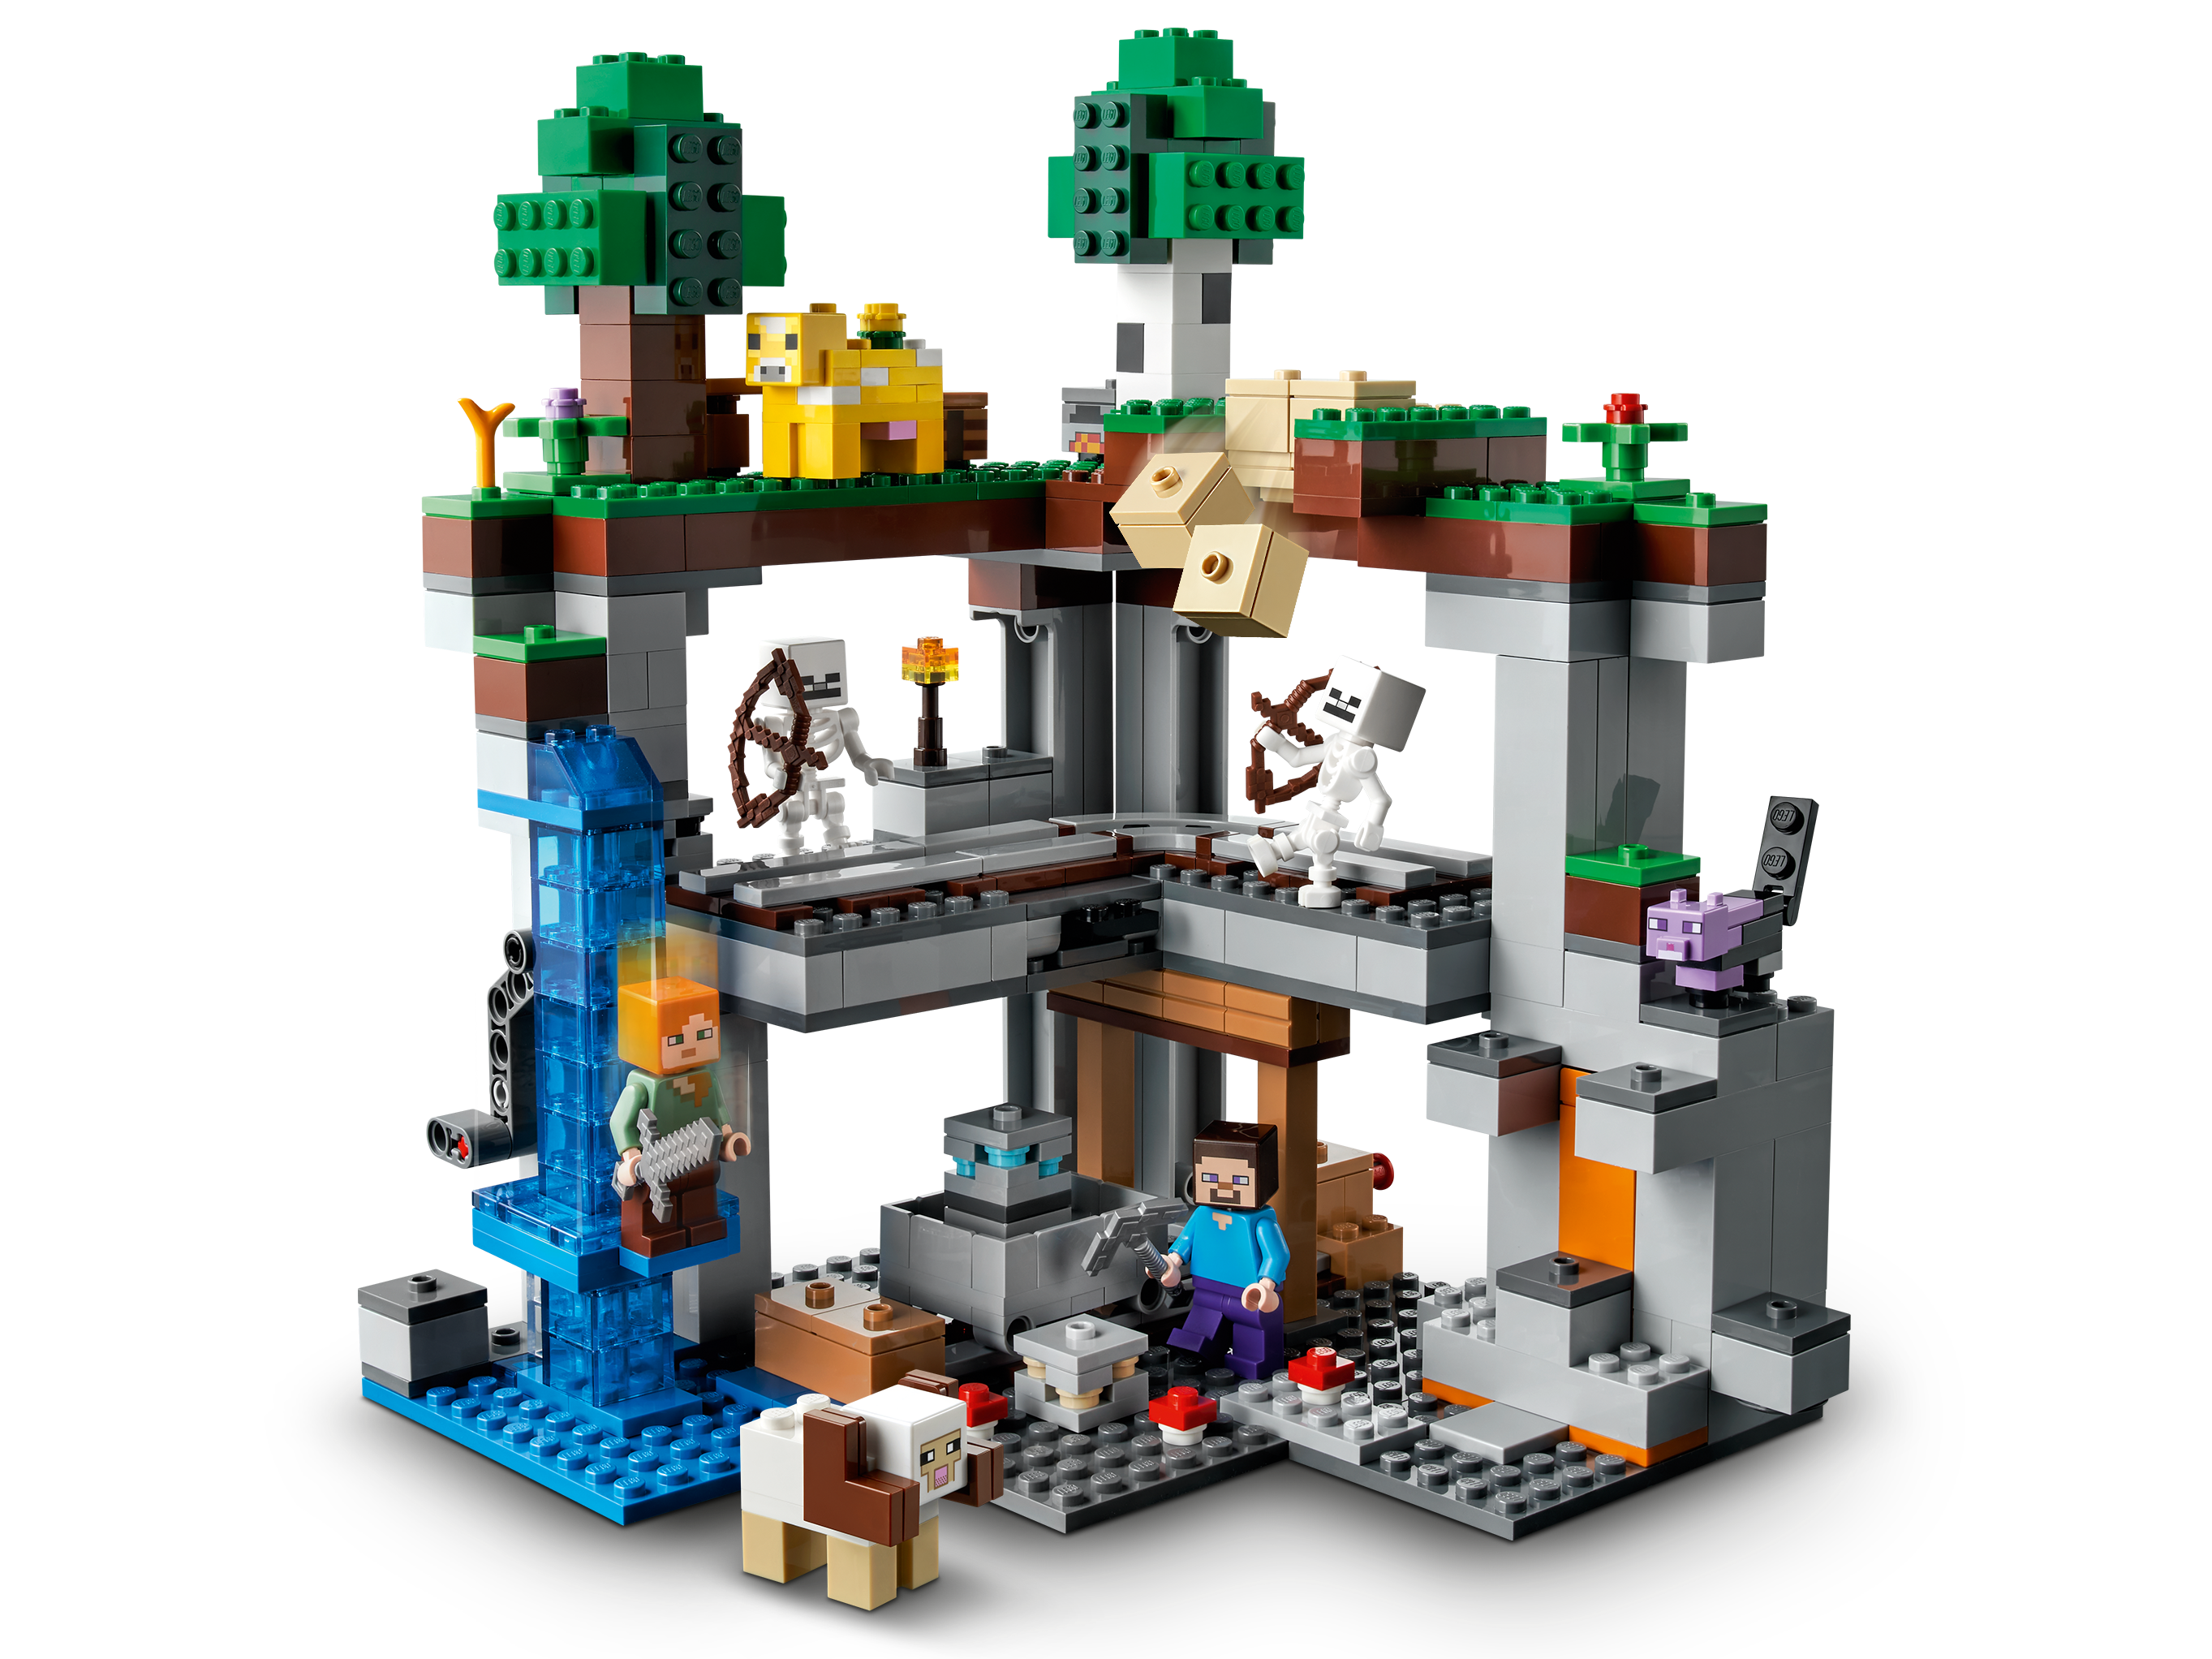 for sale online 21169 LEGO The First Adventure MINECRAFT